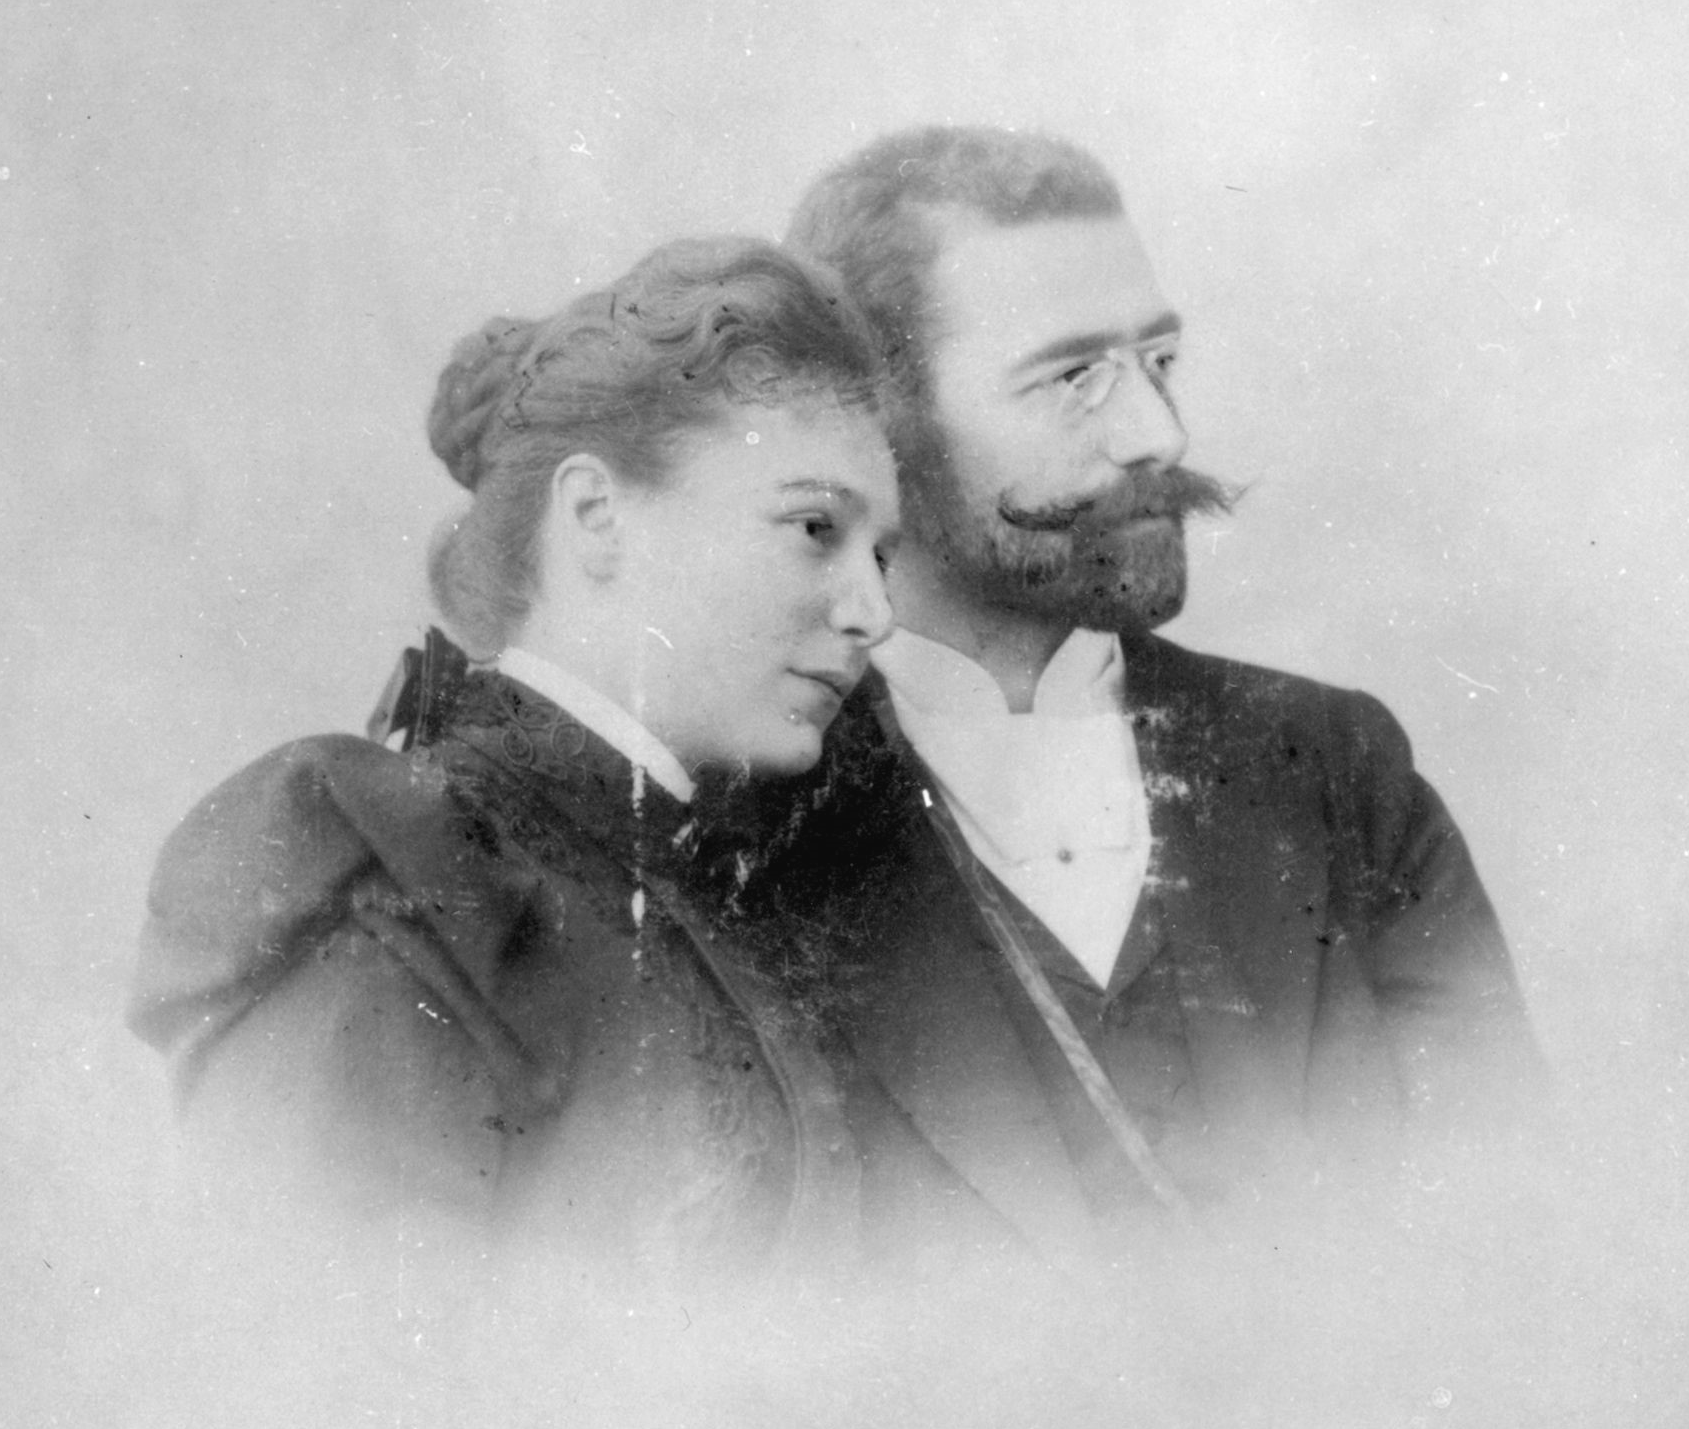 Leo Baeck with his fiancée Natalie Hamburger in 1898 (collection of the Leo Baeck Institute, New York)